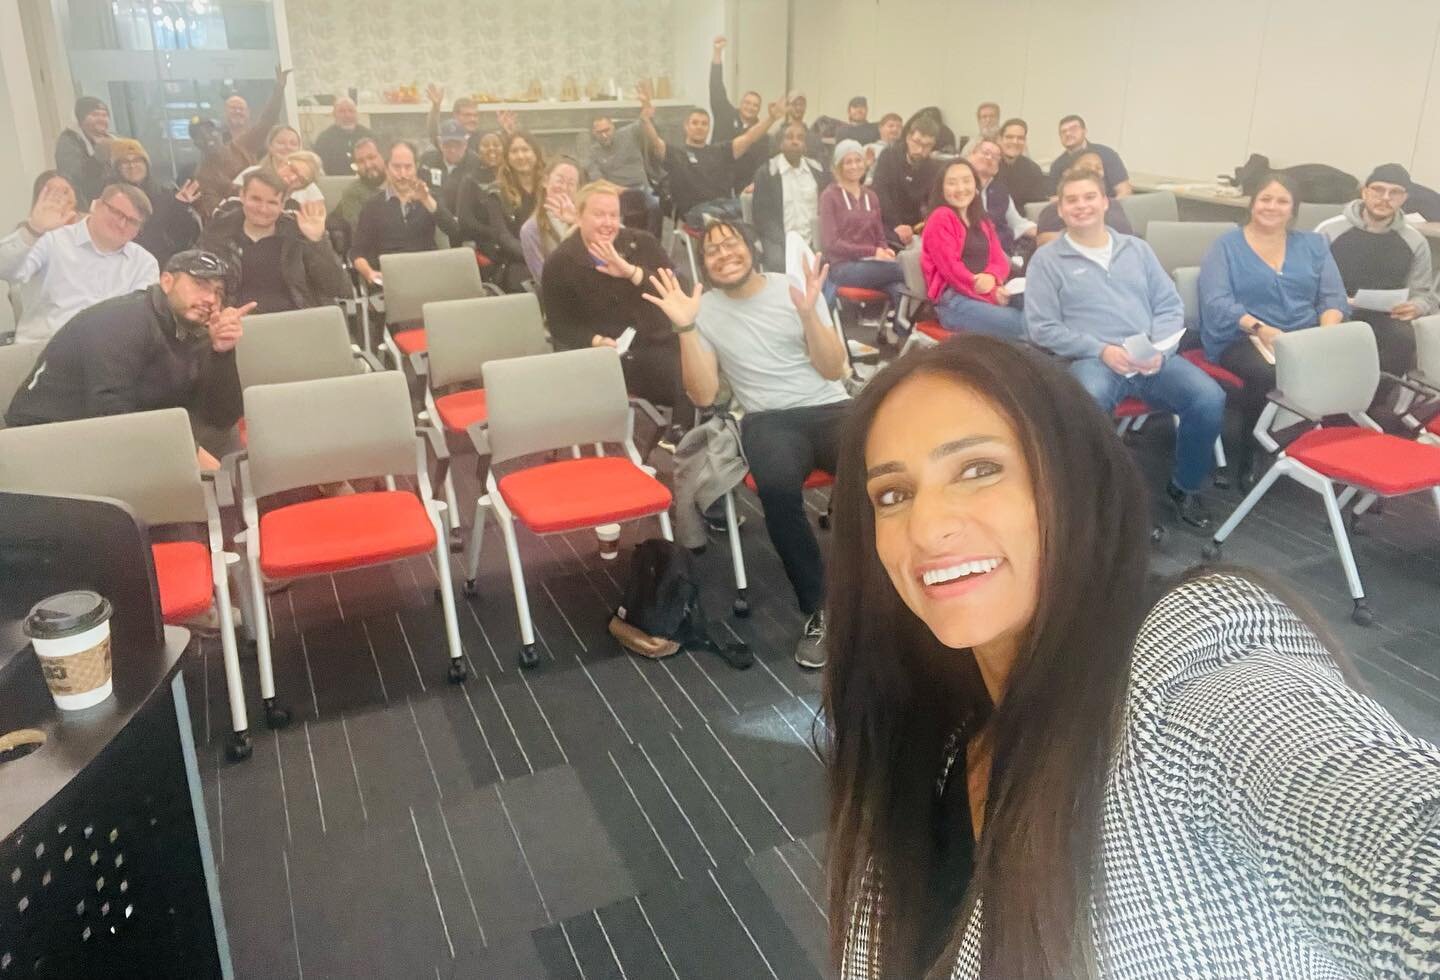 It feels so good to be doing my thing in person again. The convenience of zoom is great but nothing beats connecting with people in real life. 

I had a lovely time working with leaders of @cflcruises this morning. A great Chicago organization that i